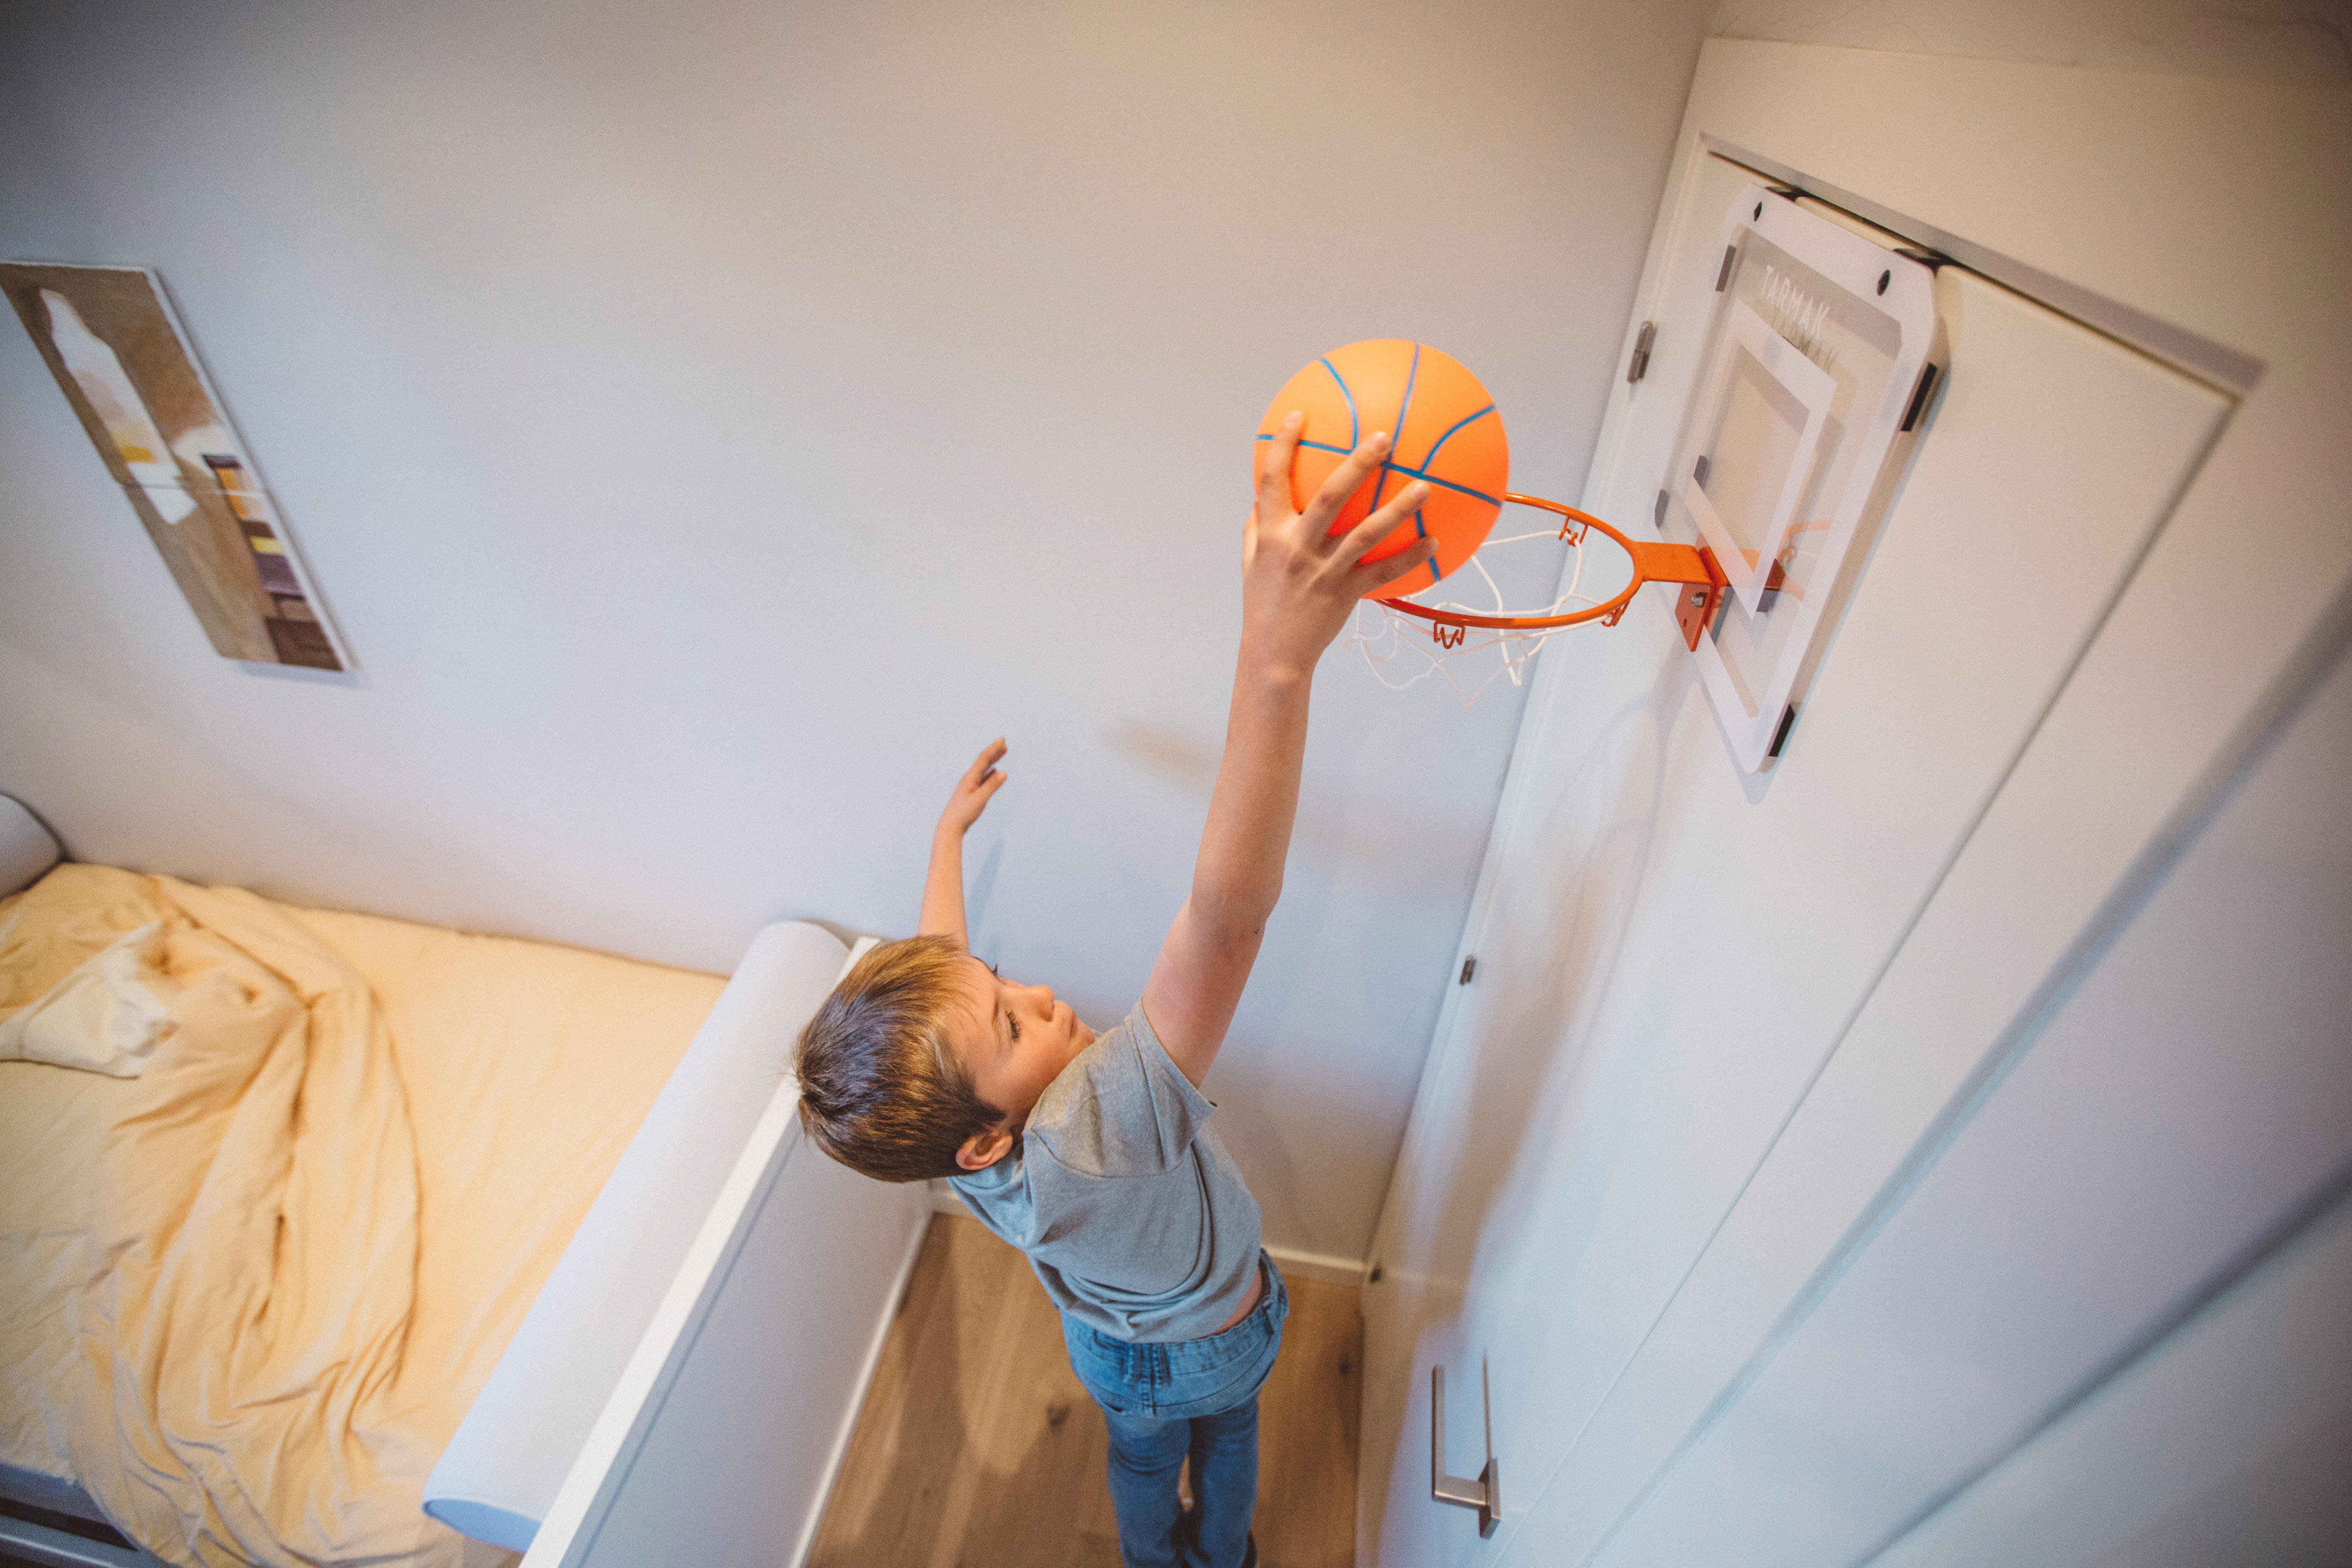 WOLFBUSH Basketball Hoop Set Mini Basketball Board for Children Hanging Basketball Board Toy for Indoor and Outdoor Sports 